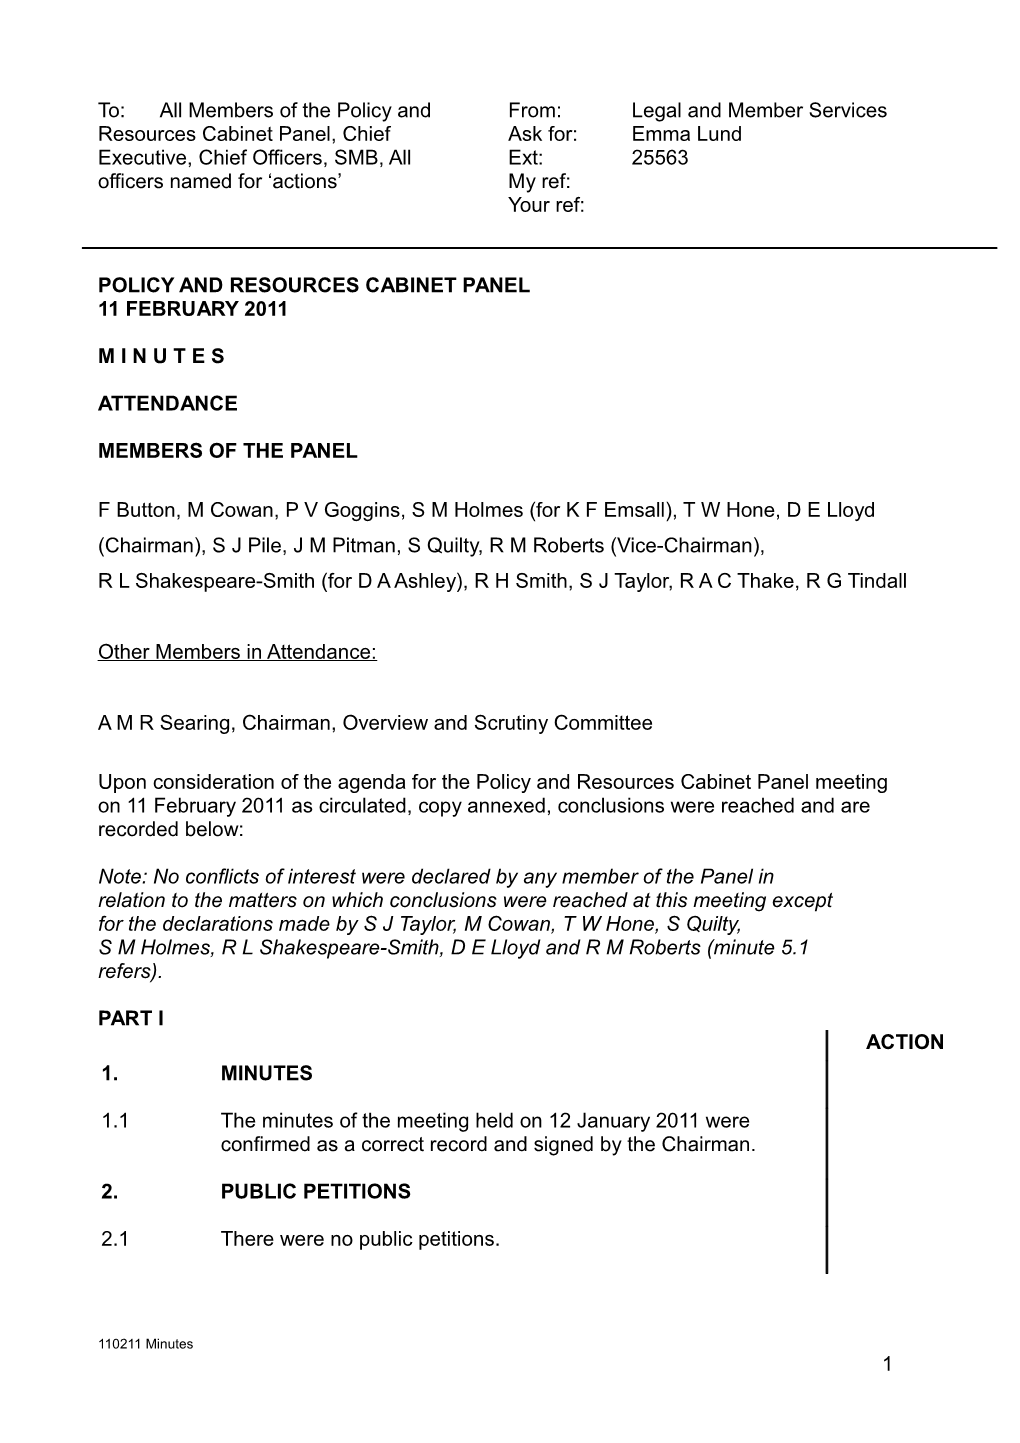 Minutes of a Meeting of the Policy and Resources Cabinet Panel Held on Friday 11 February